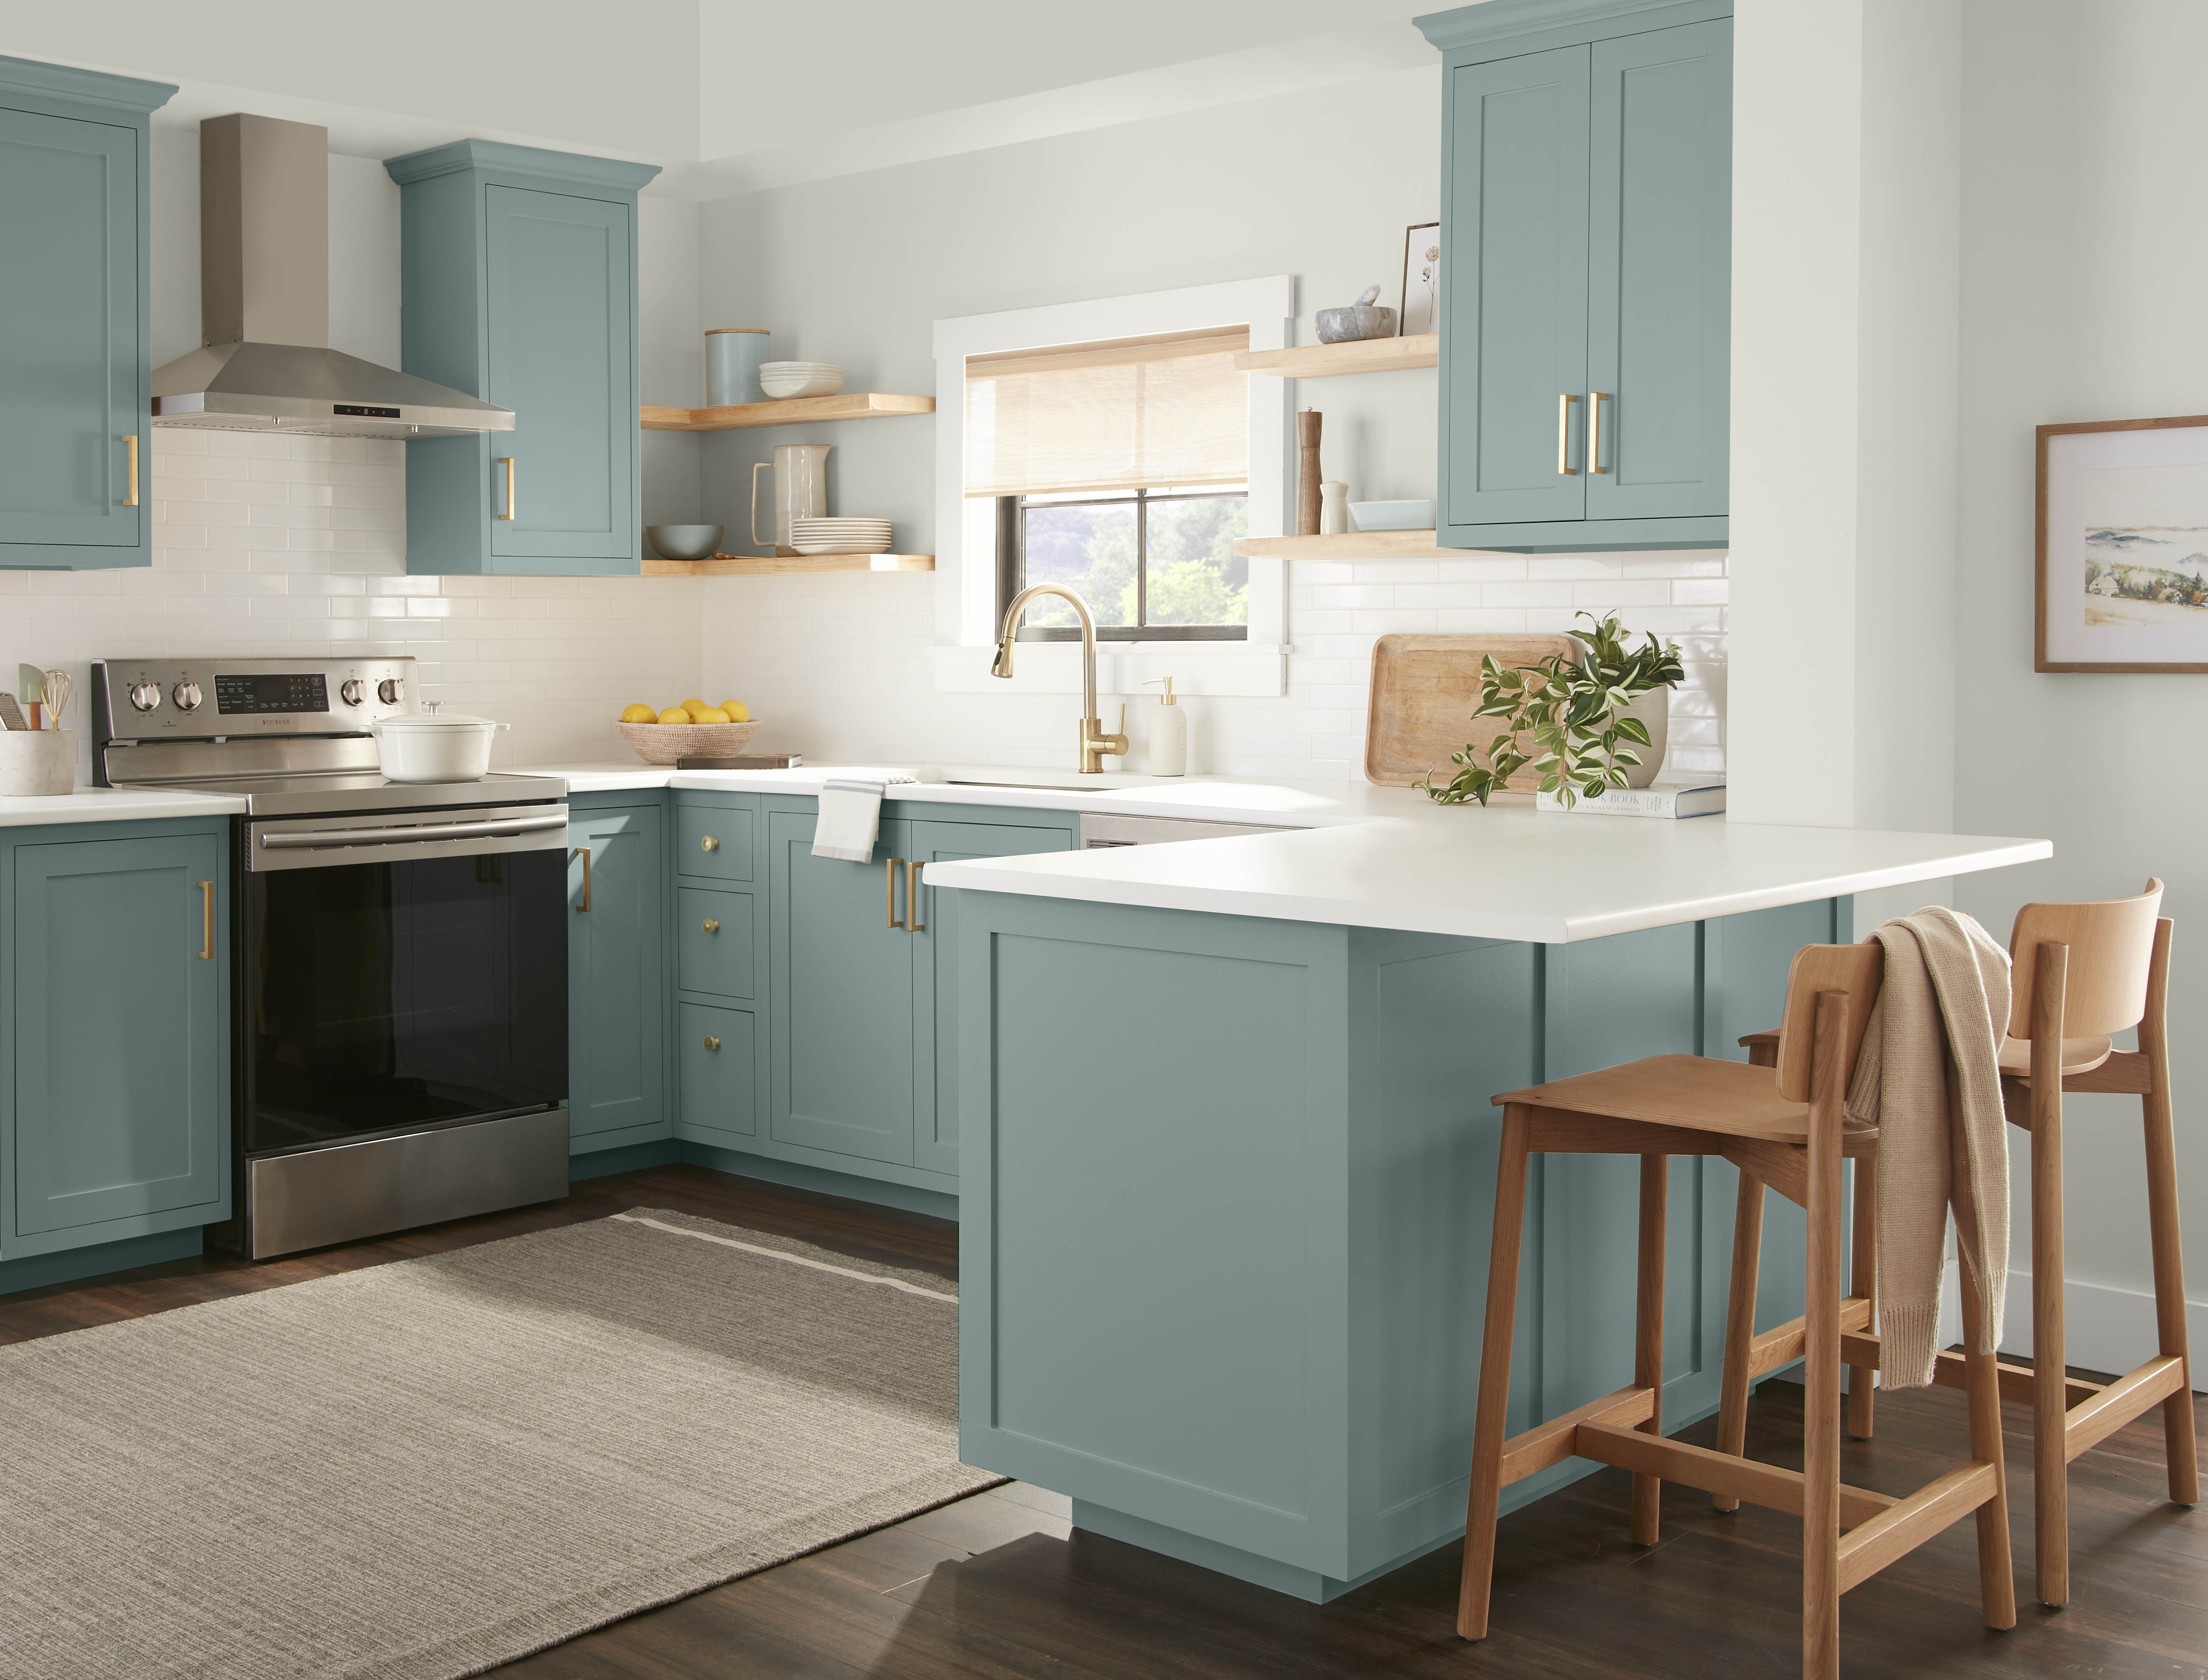 A bright white kitchen with lower and upper cabinets painted in a dusty blue green colour